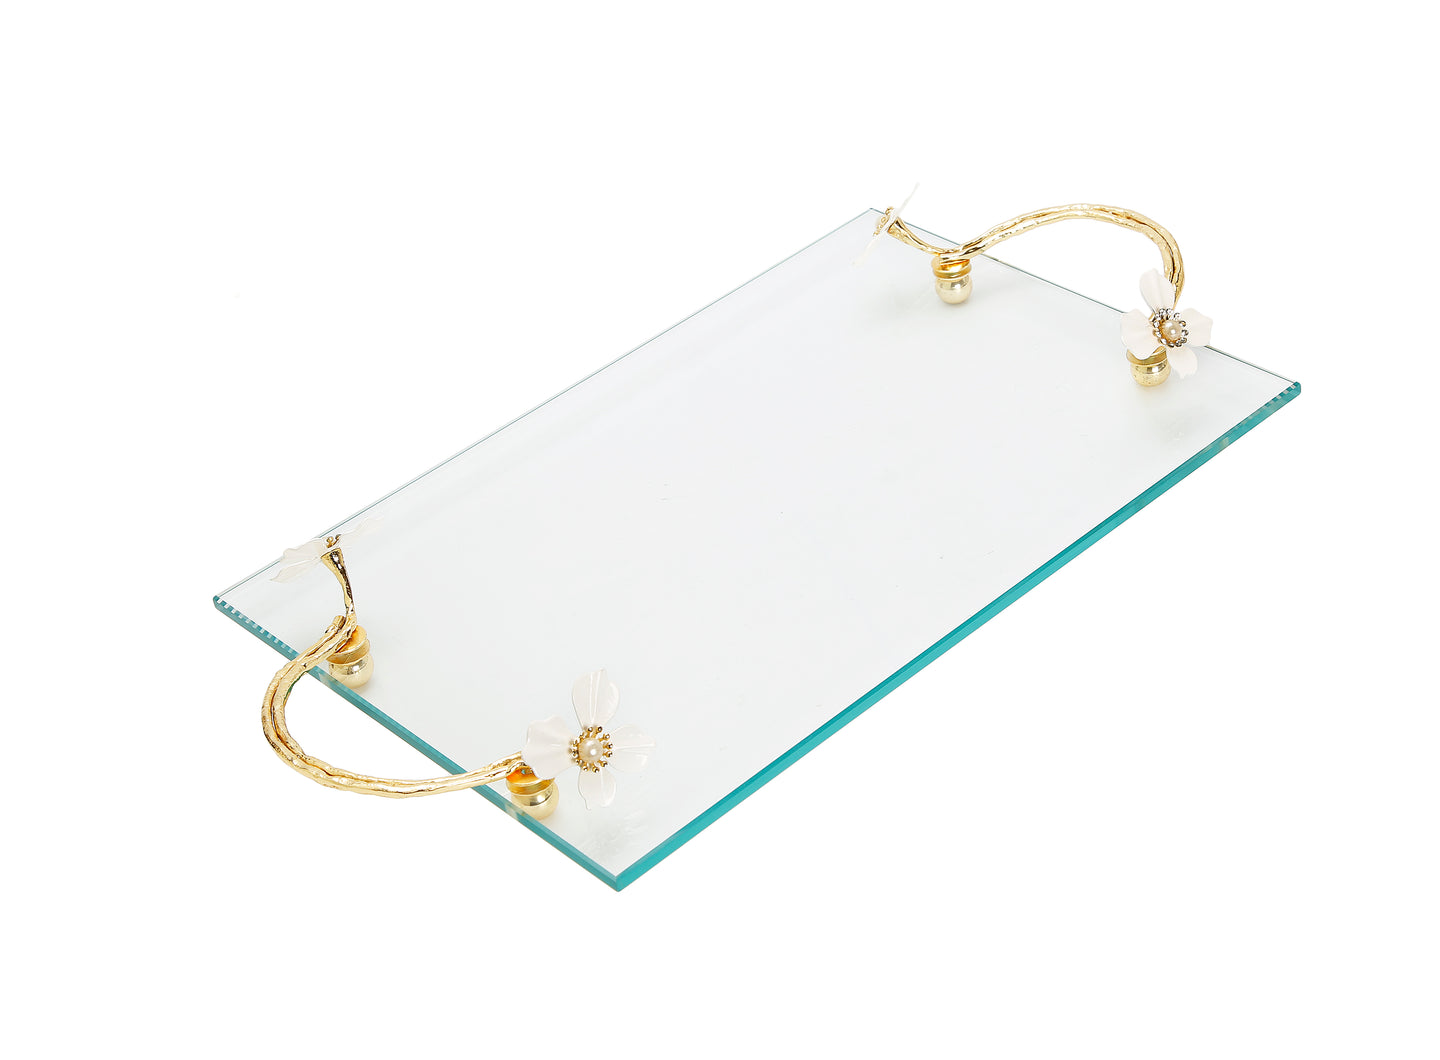 Glass Tray with White Jeweled Flower Handles